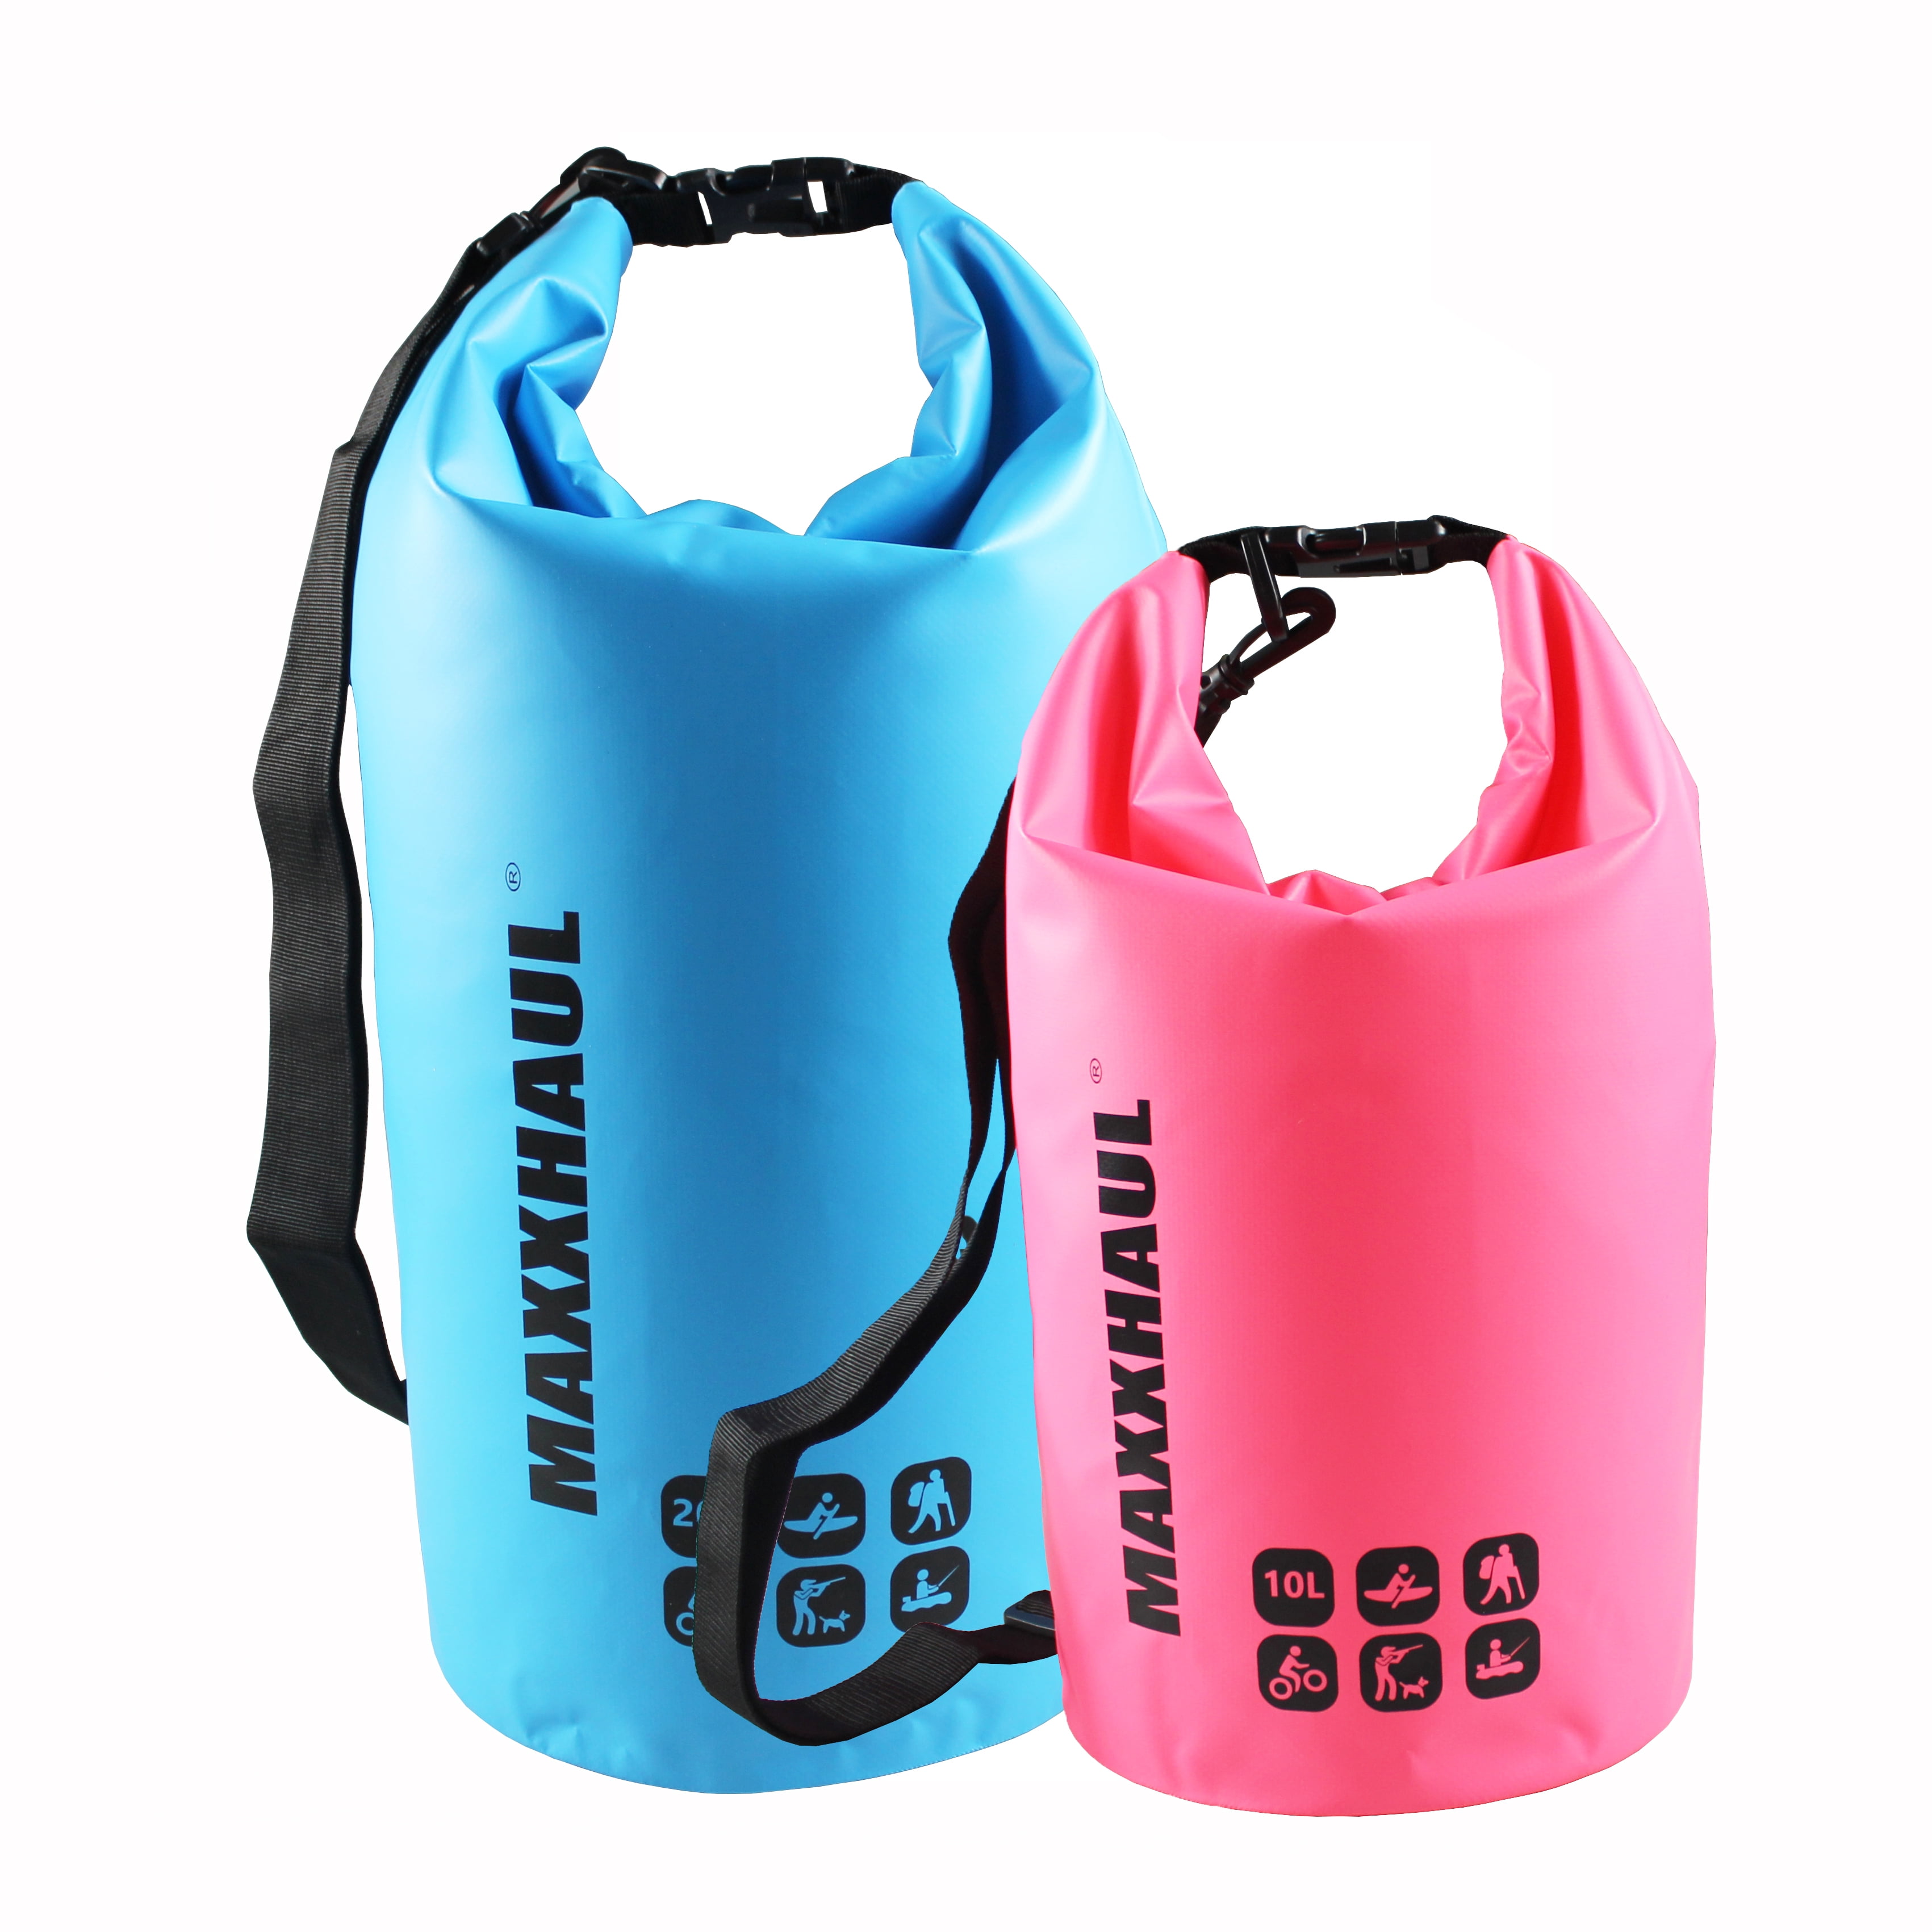 Roll Top Floating Dry Sack Keeps Stuff Dry for Camping,Swimming,Kayaking,Boating,Hiking,Adjustable Shoulder Strap Included 10L/20L/30L Dlight Outdoor Lightweight Waterproof Dry Bag